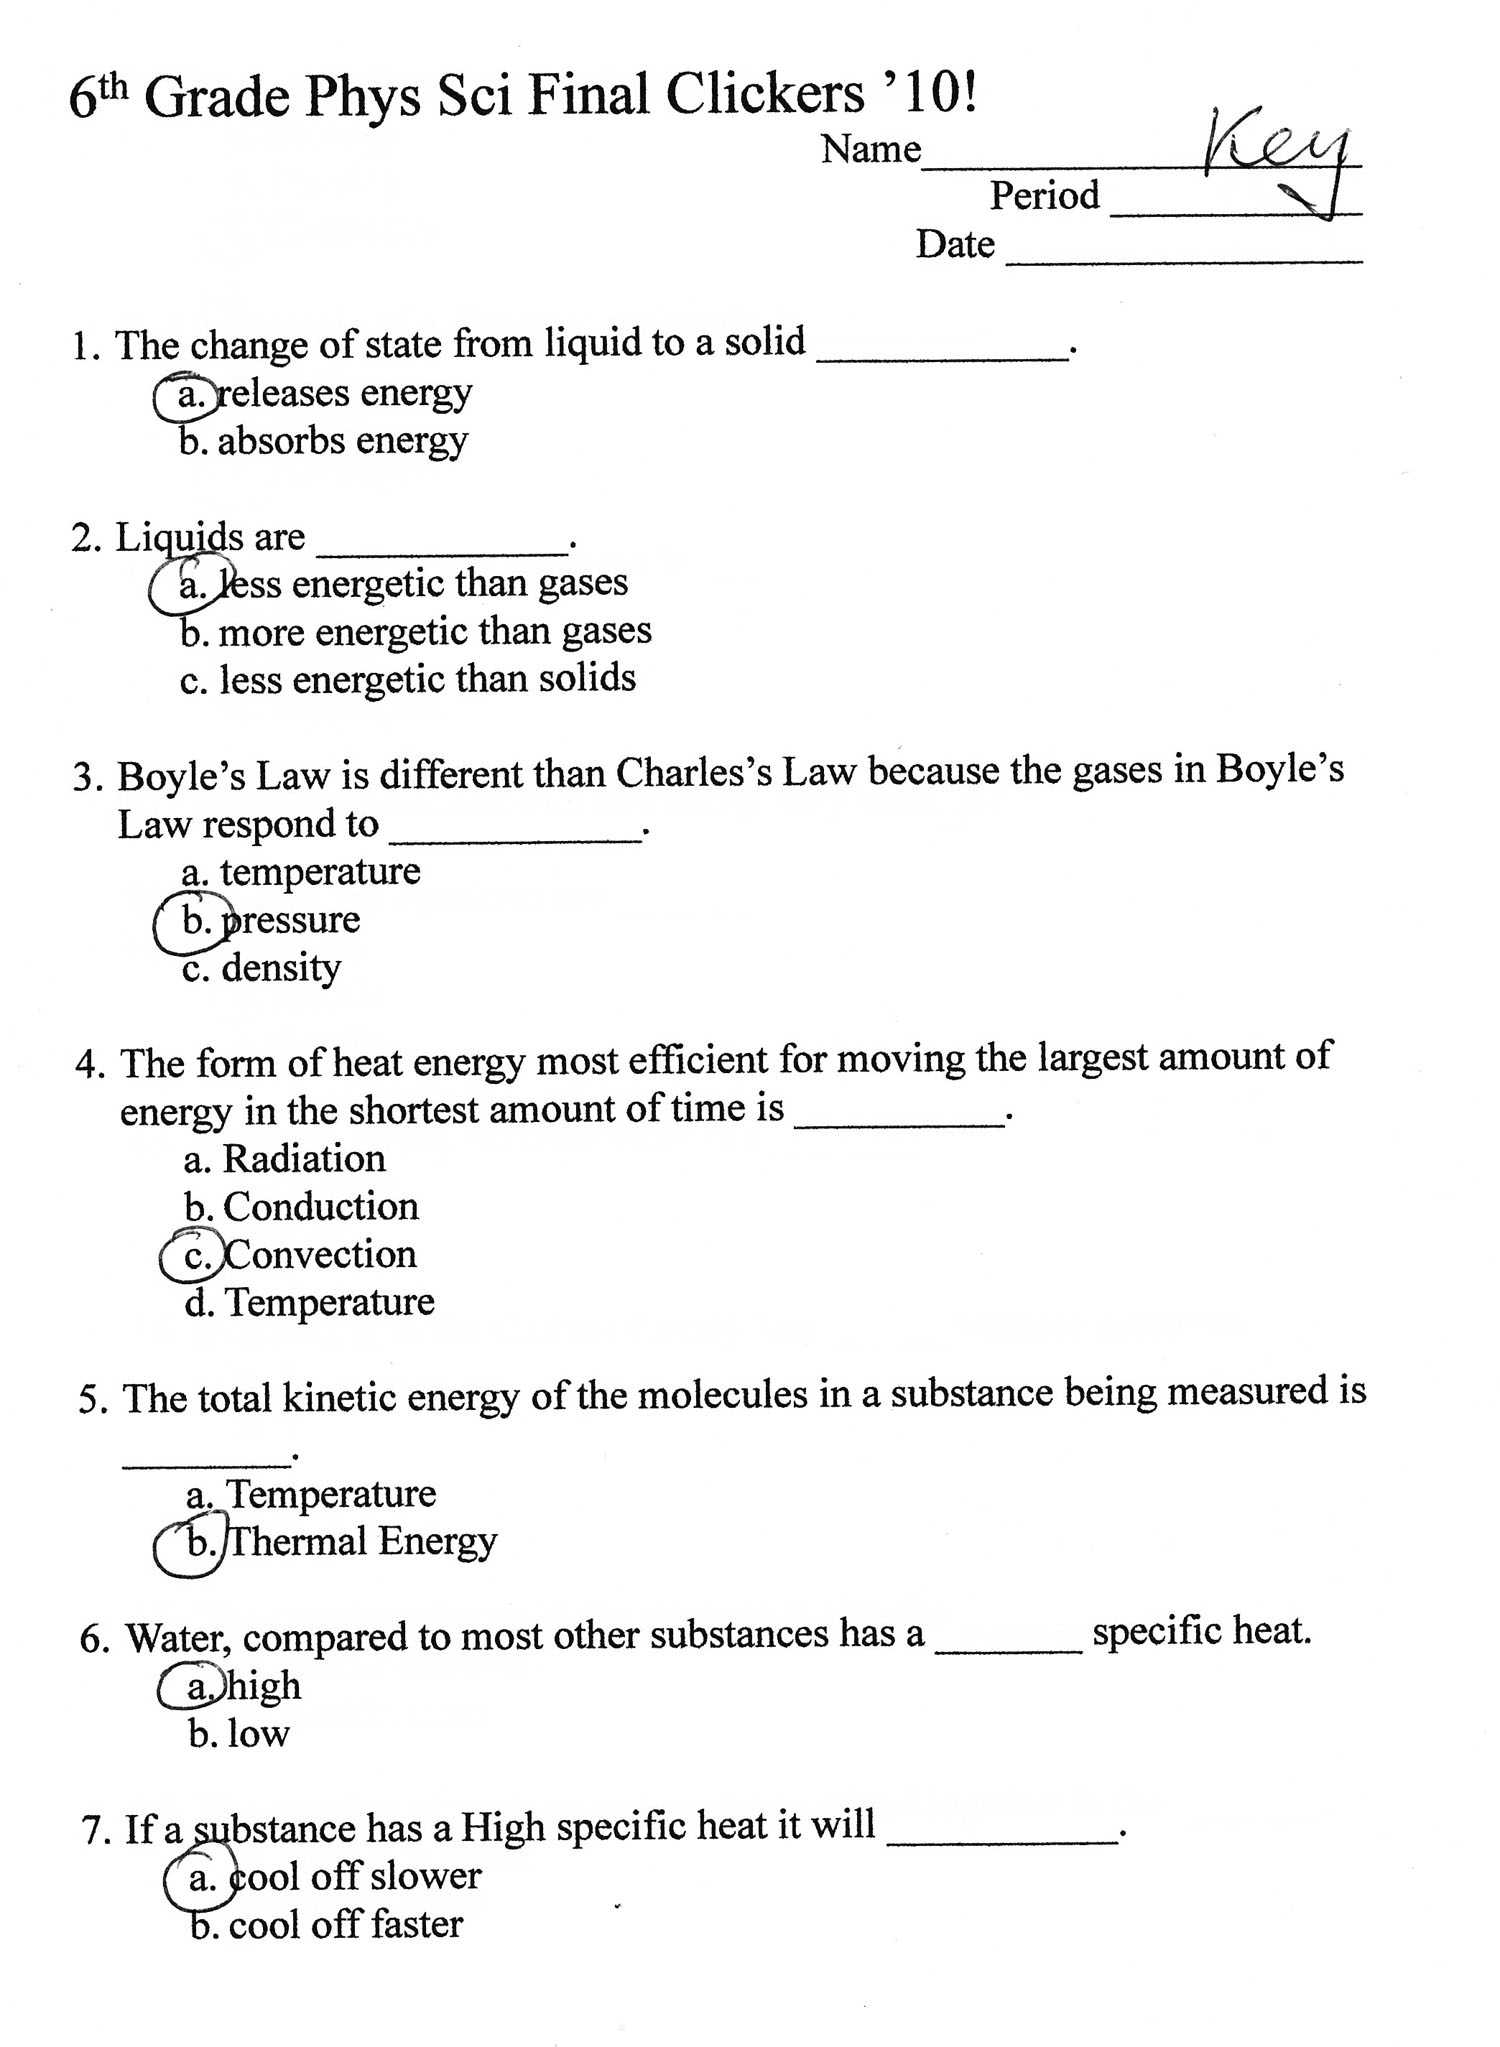 Energy Transformation Worksheet Middle School with Energy Worksheet Physical Science Kidz Activities